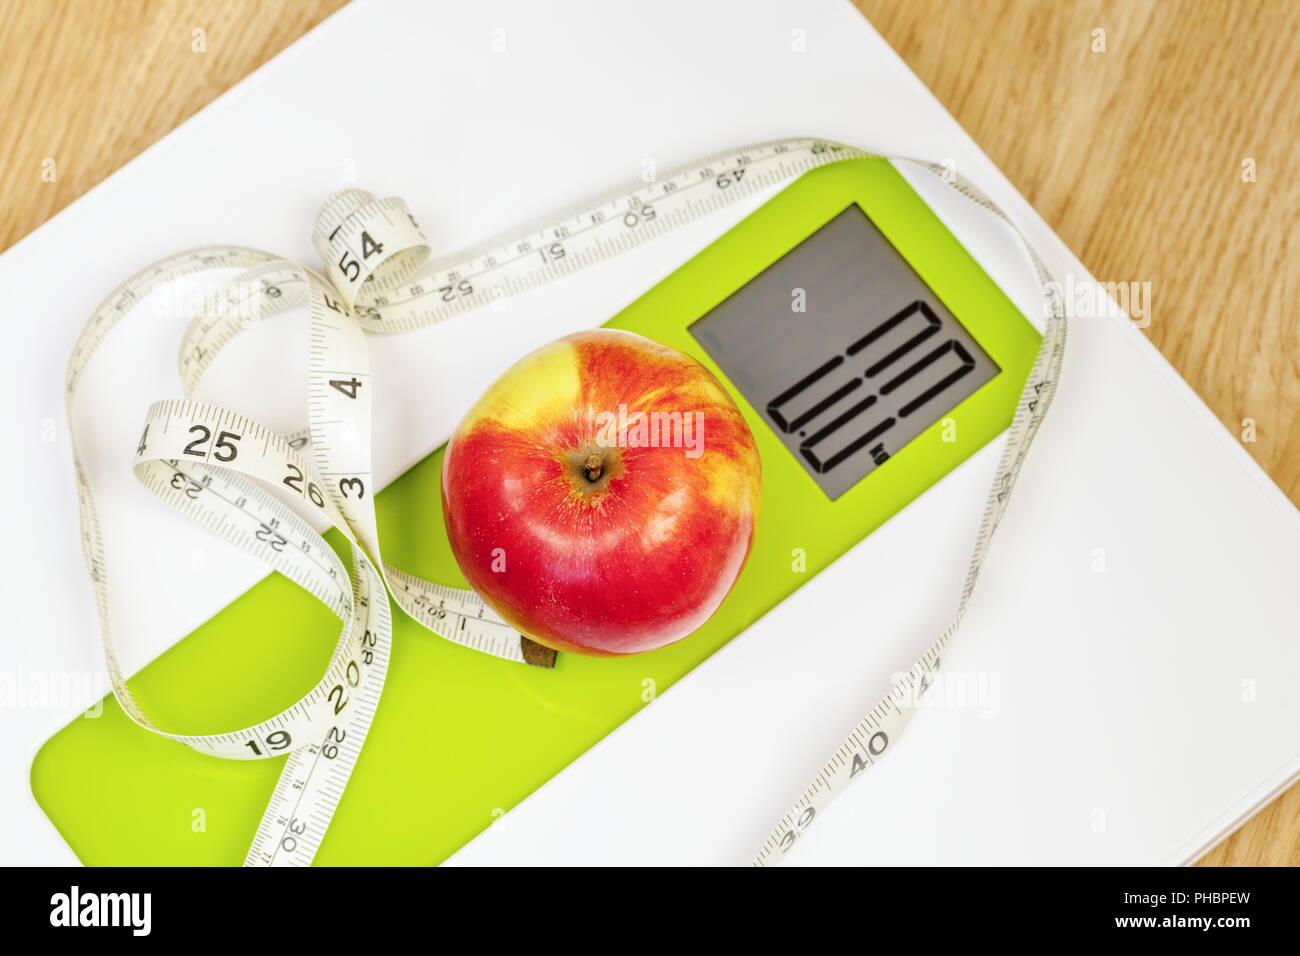 Apple with measuring tape close up on digital scale Stock Photo